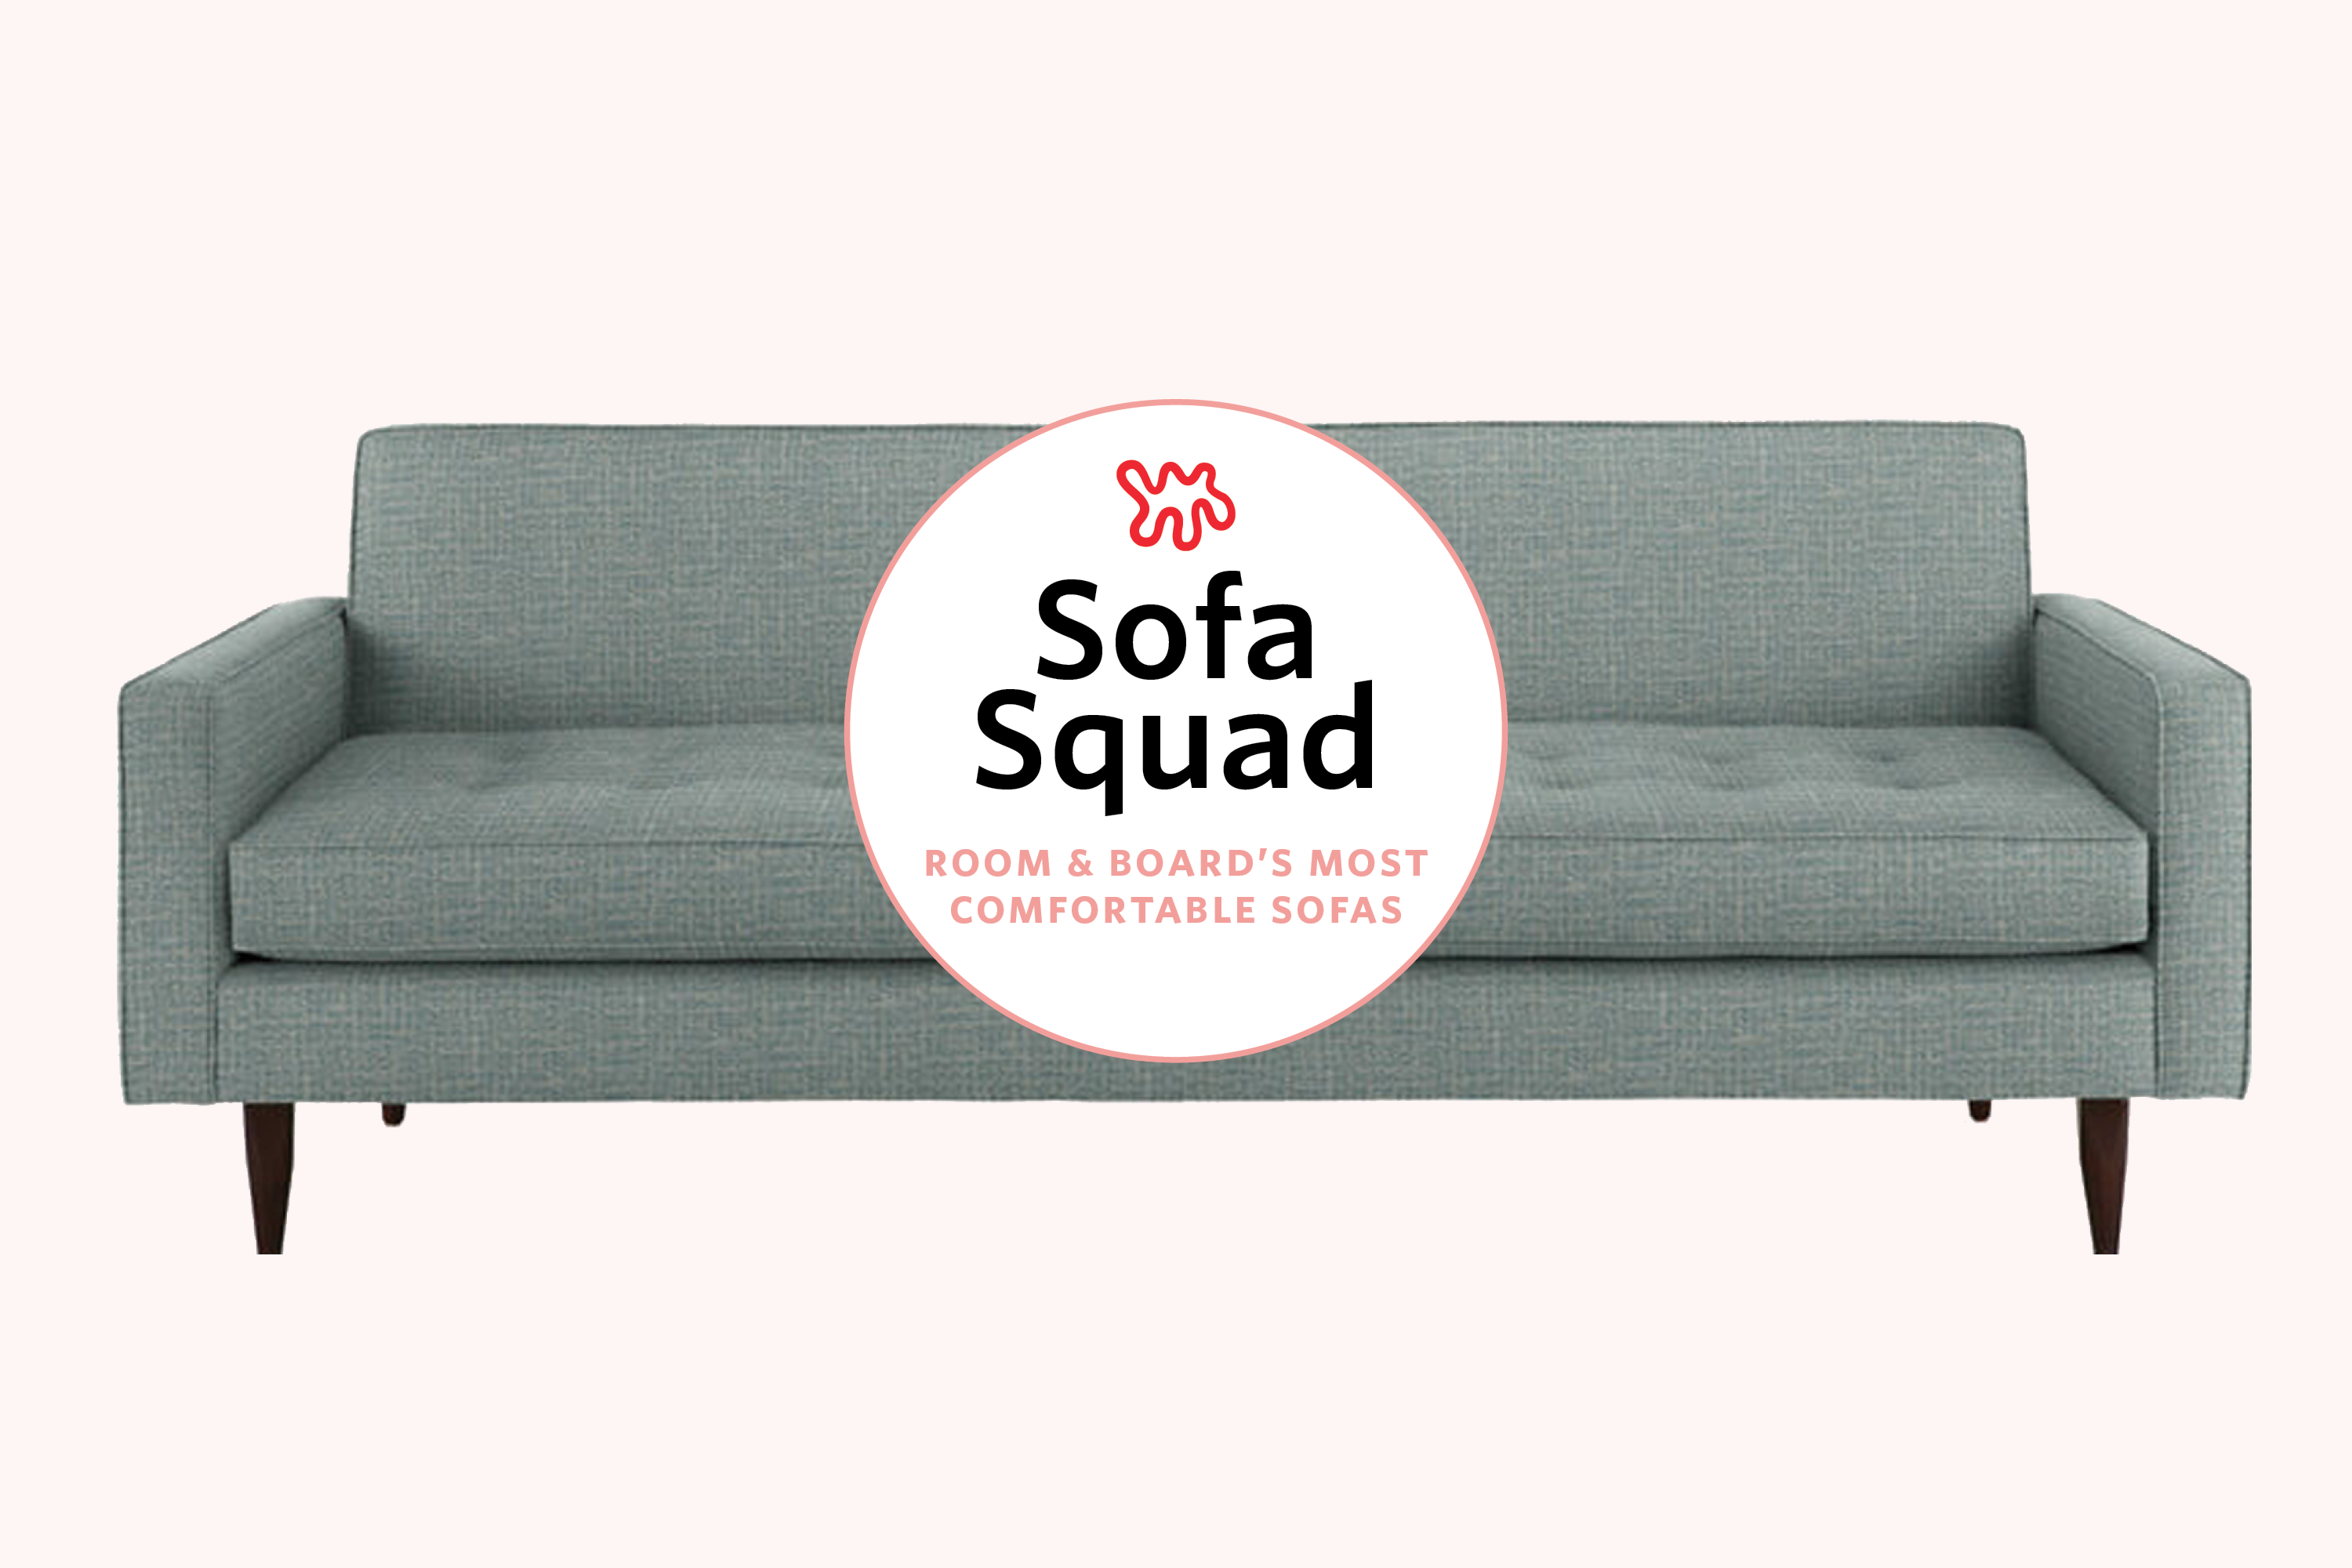 Most Comfortable Sofas At Room Board, Room And Board Sofa Reviews Reddit